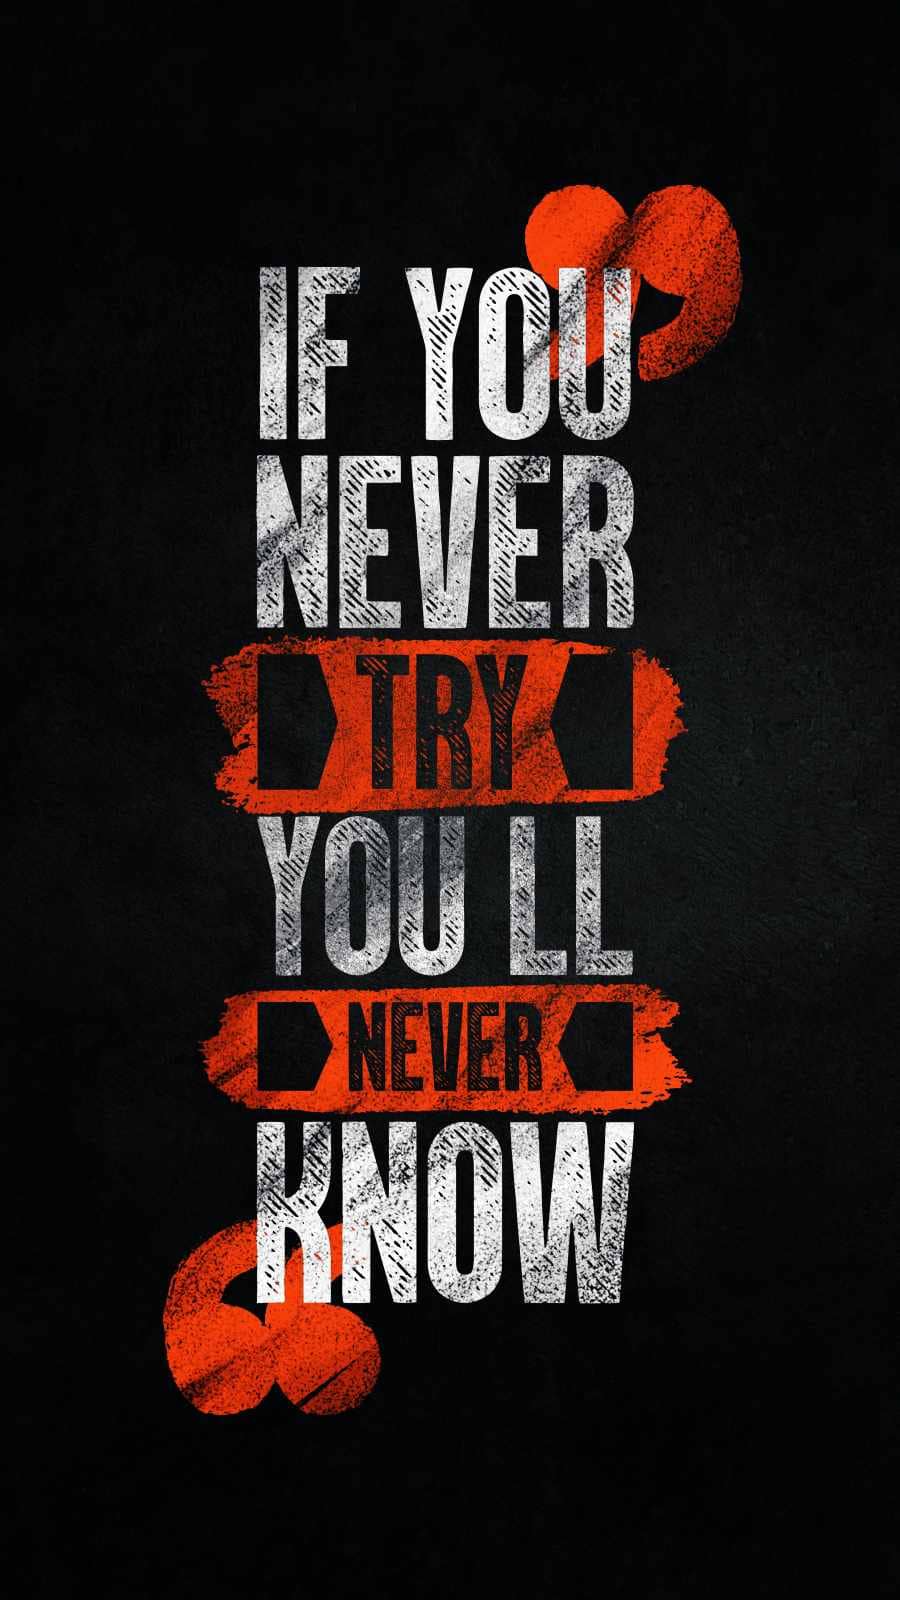 Never Try Never Know wallpaper iphone